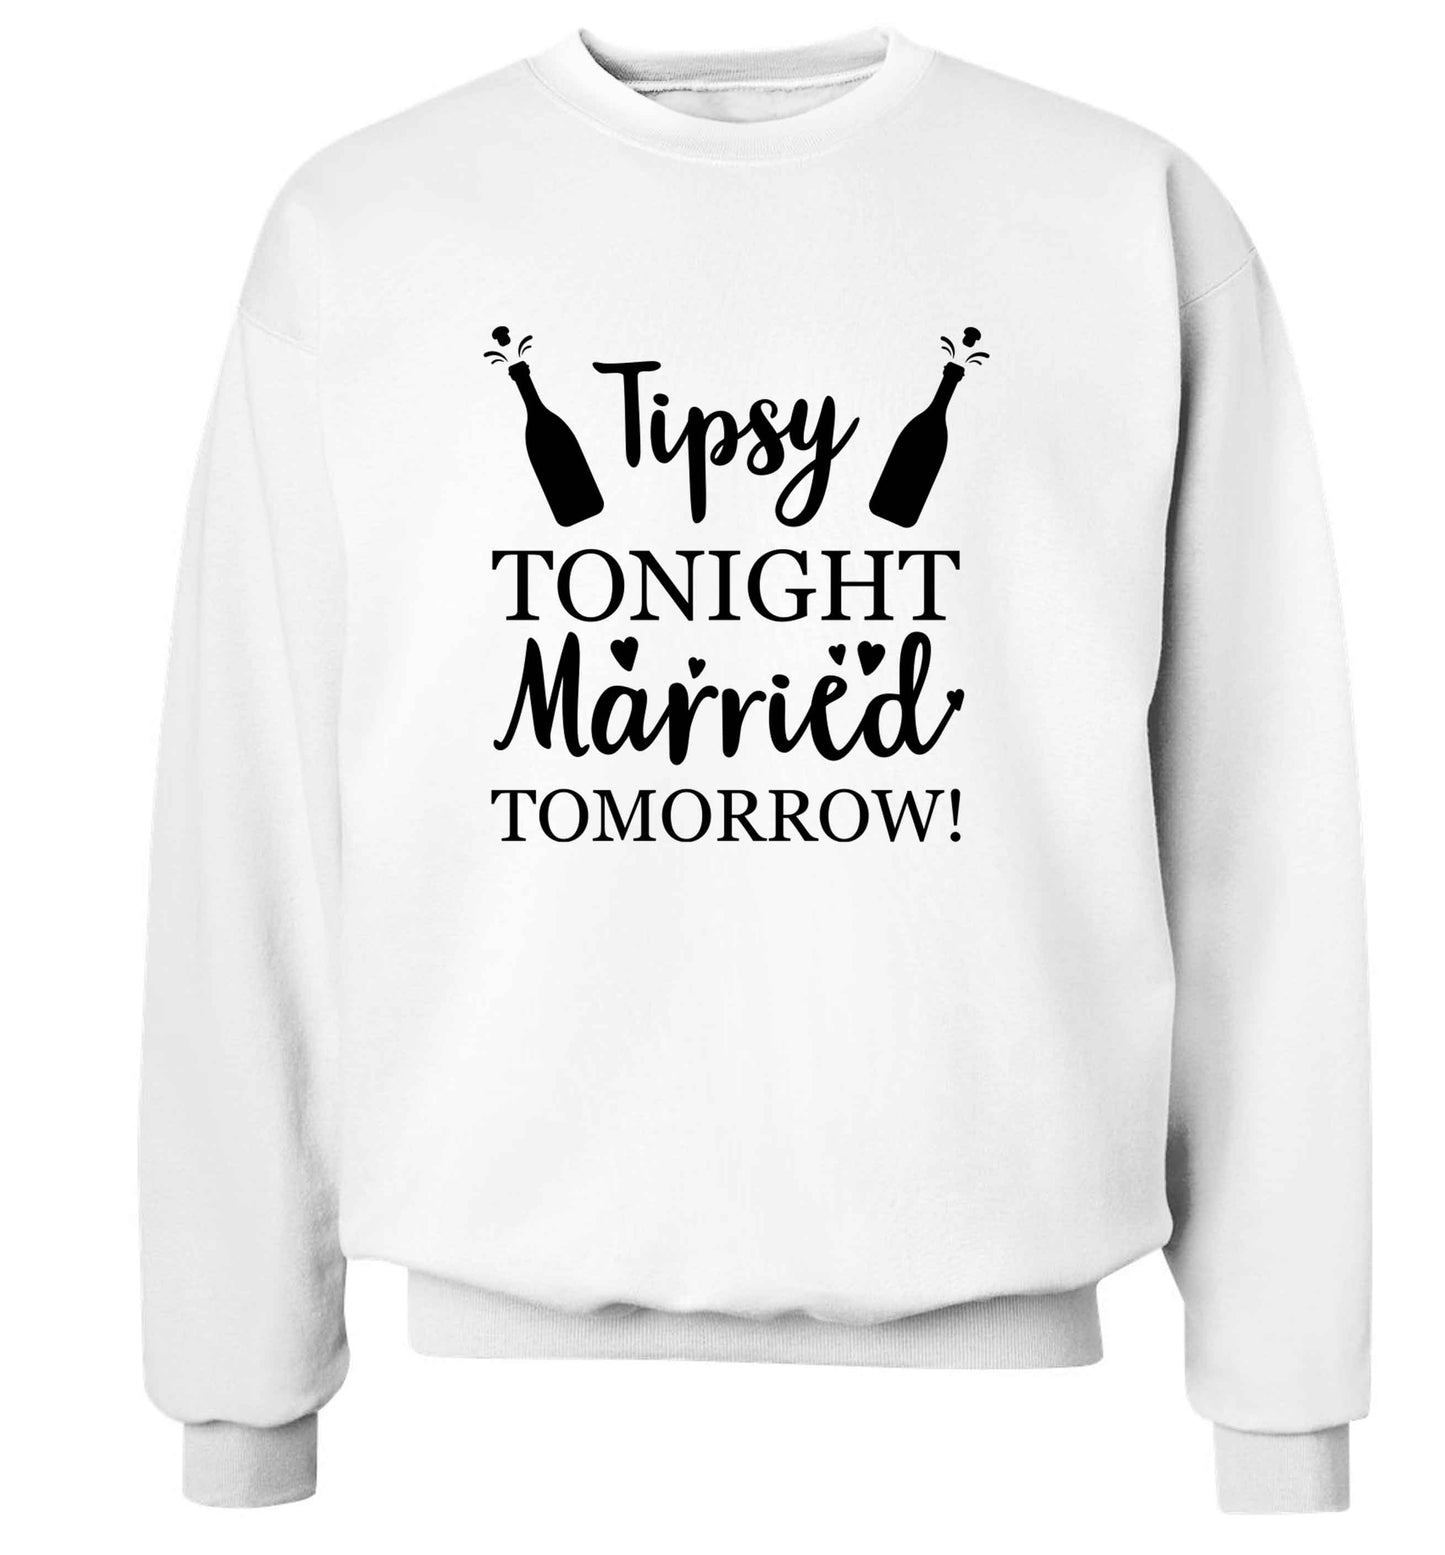 Personalised wedding thank you's Mr and Mrs wedding and date! Ideal wedding favours! adult's unisex white sweater 2XL